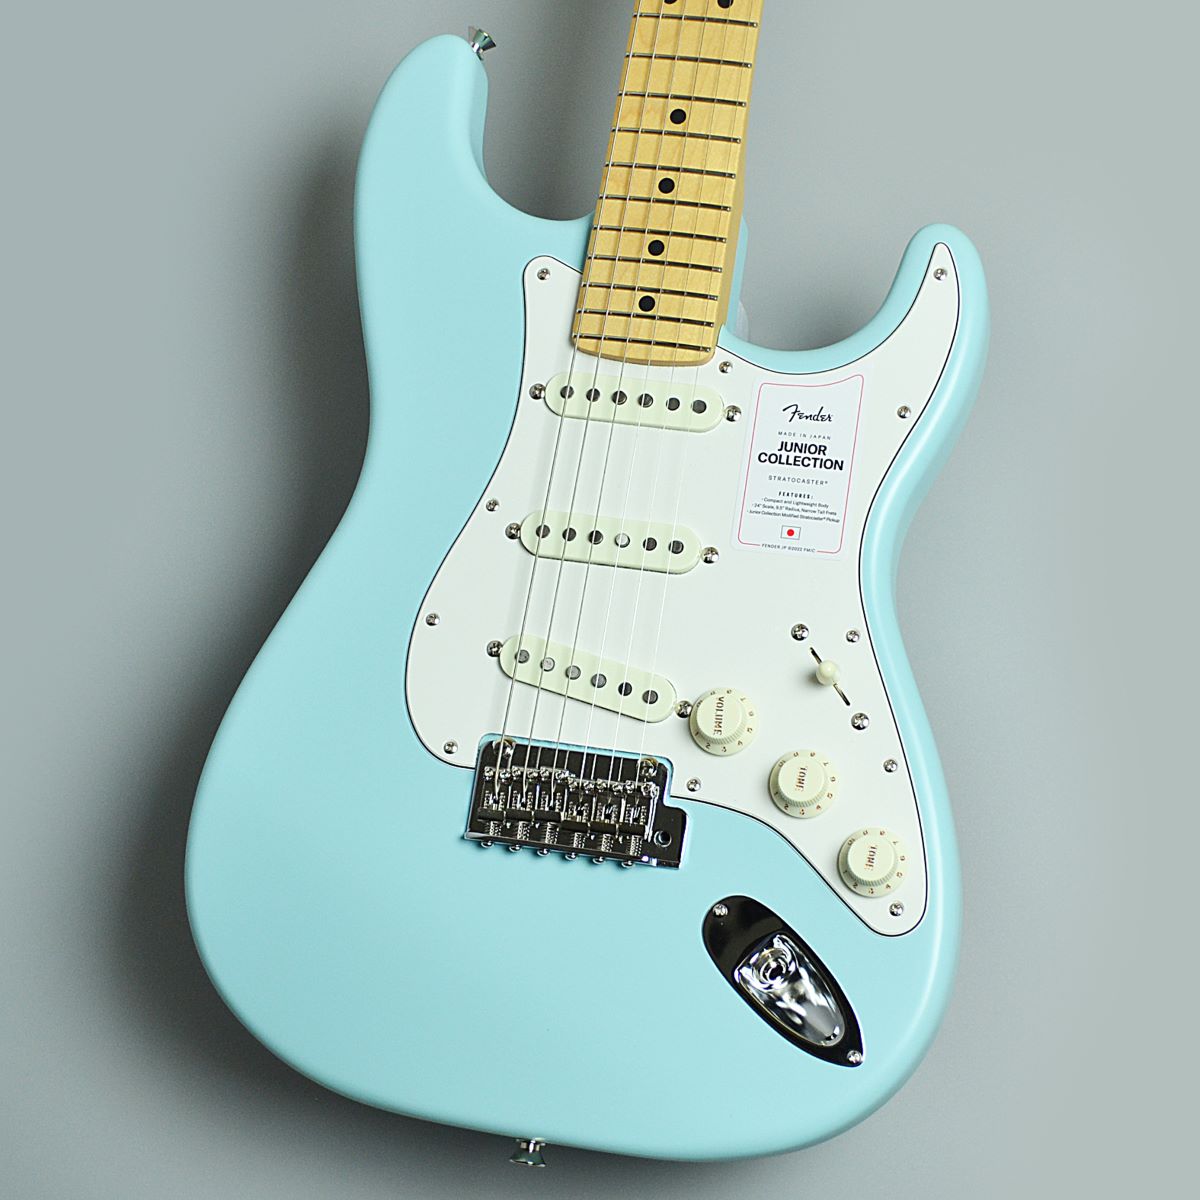 Fender Made in Japan Junior Collection Stratocaster Satin